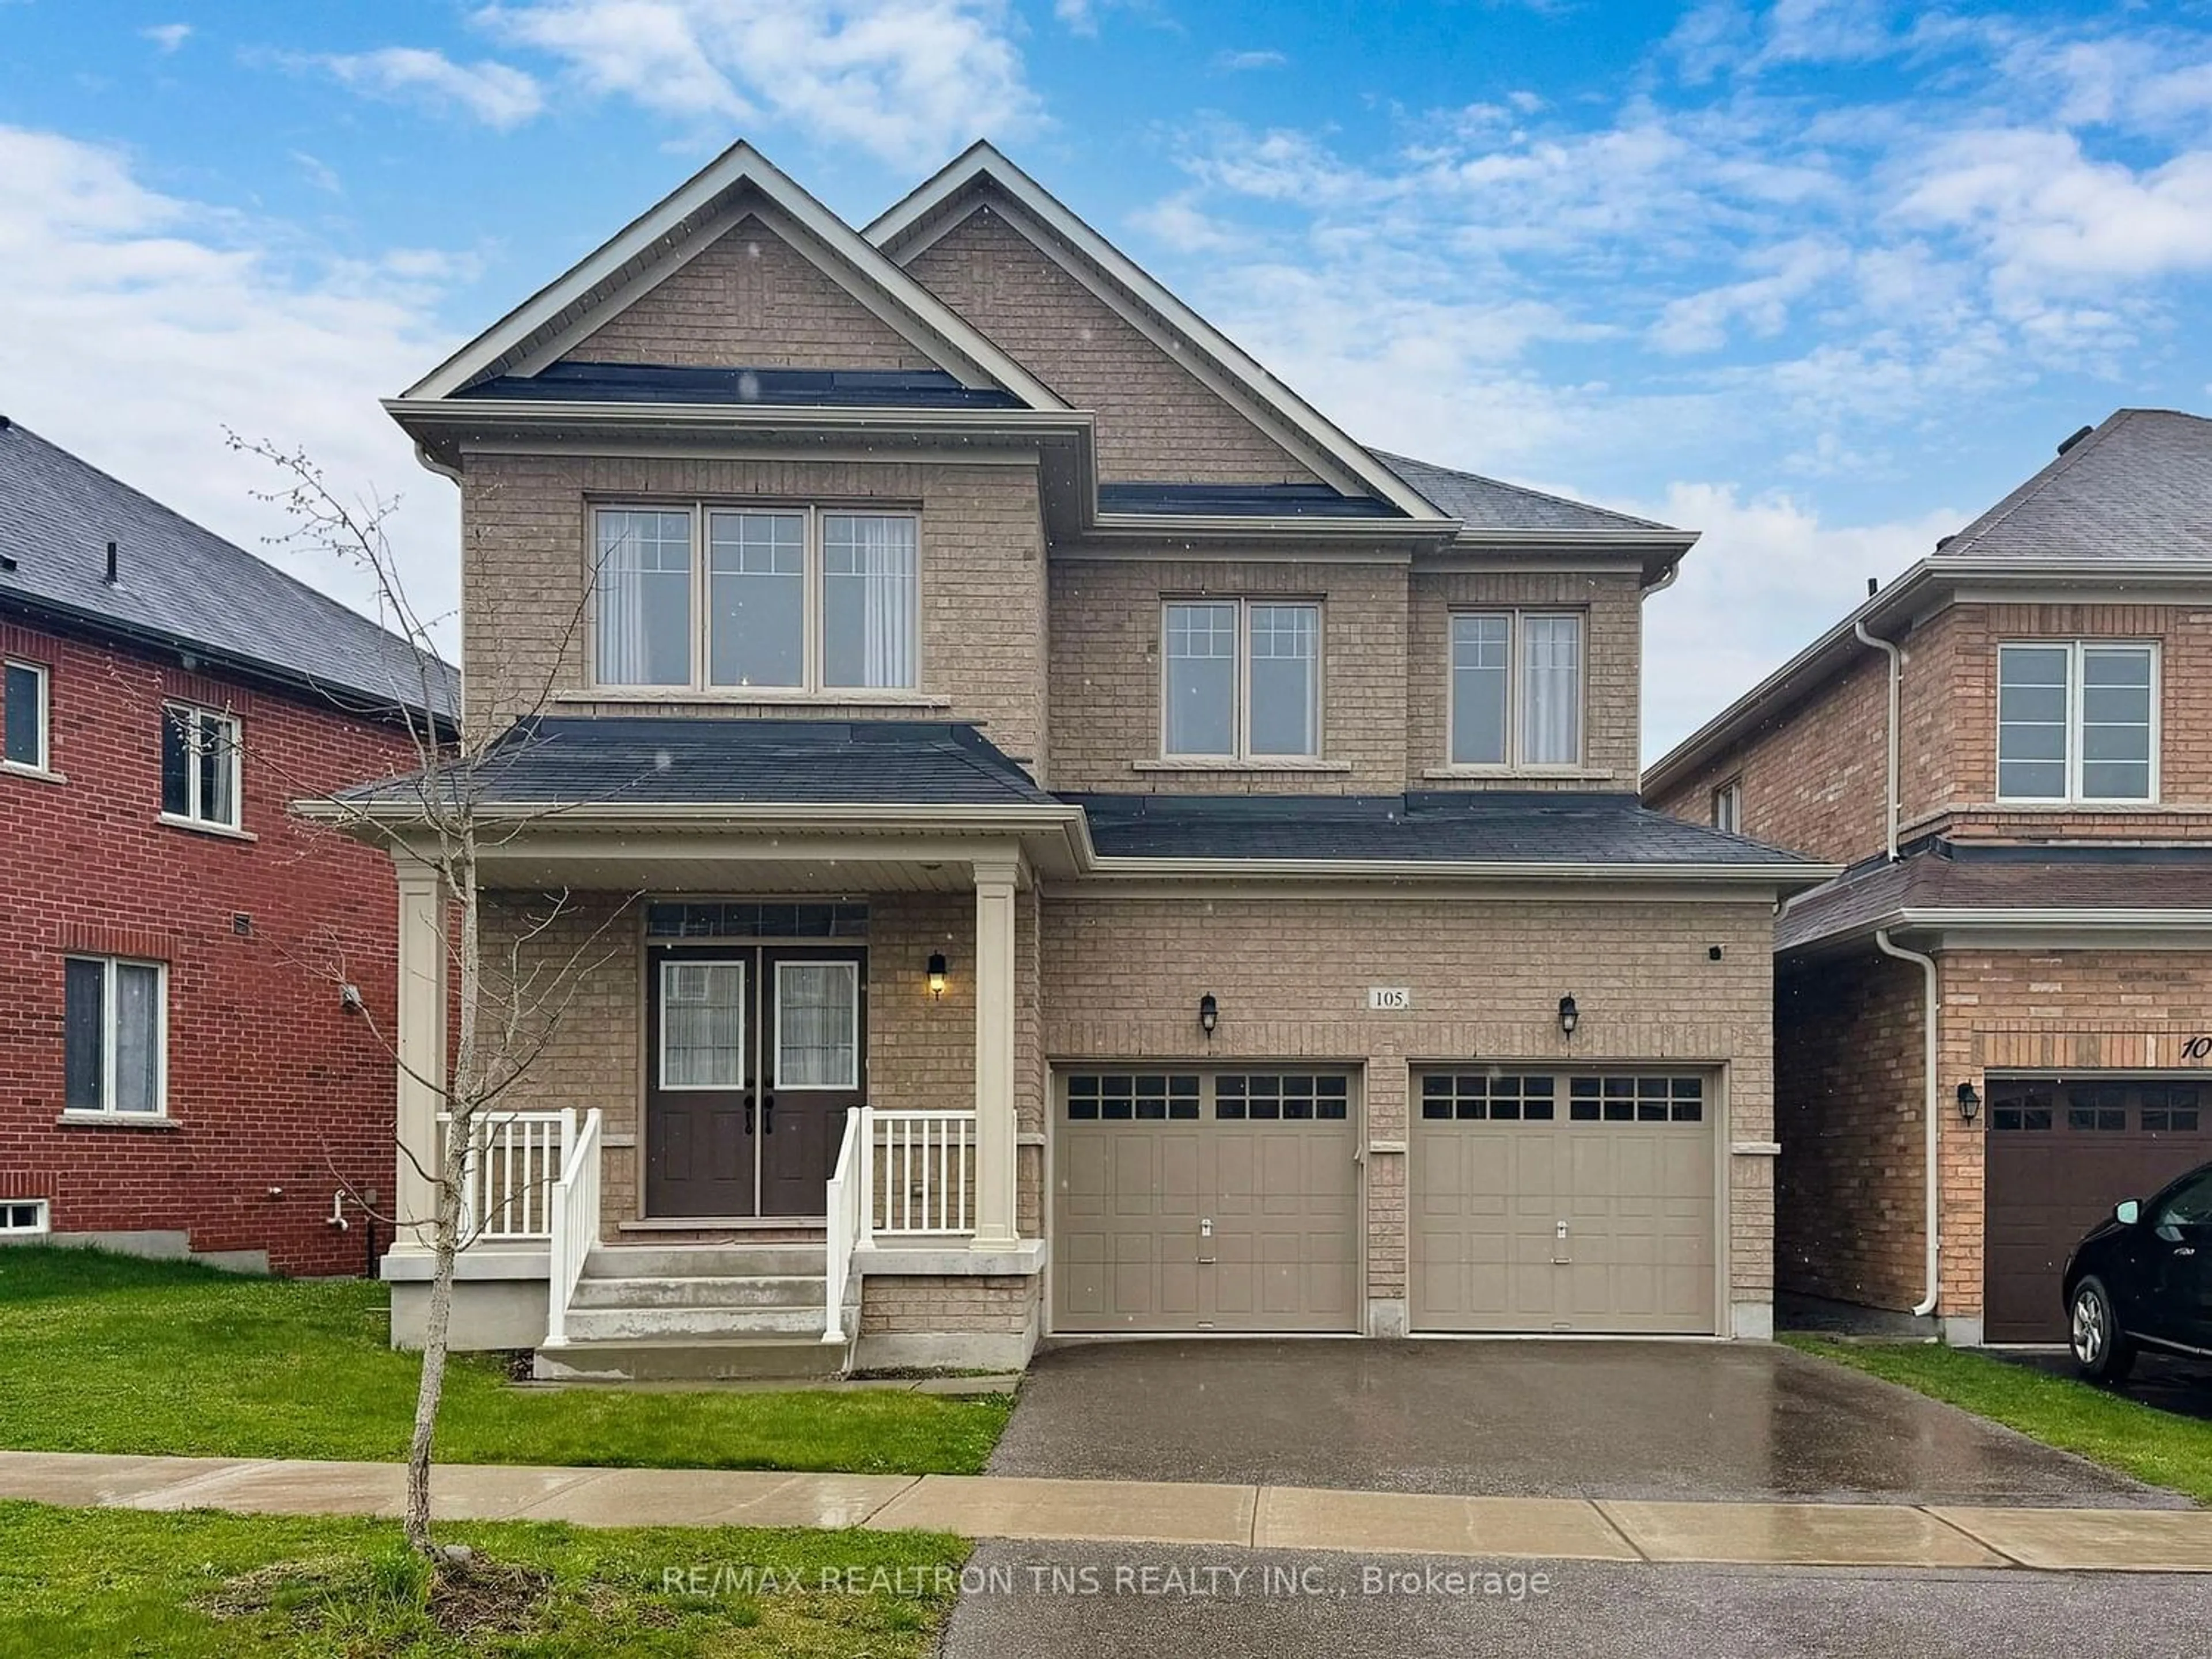 Home with brick exterior material for 105 Roy Harper Ave, Aurora Ontario L4G 0V5